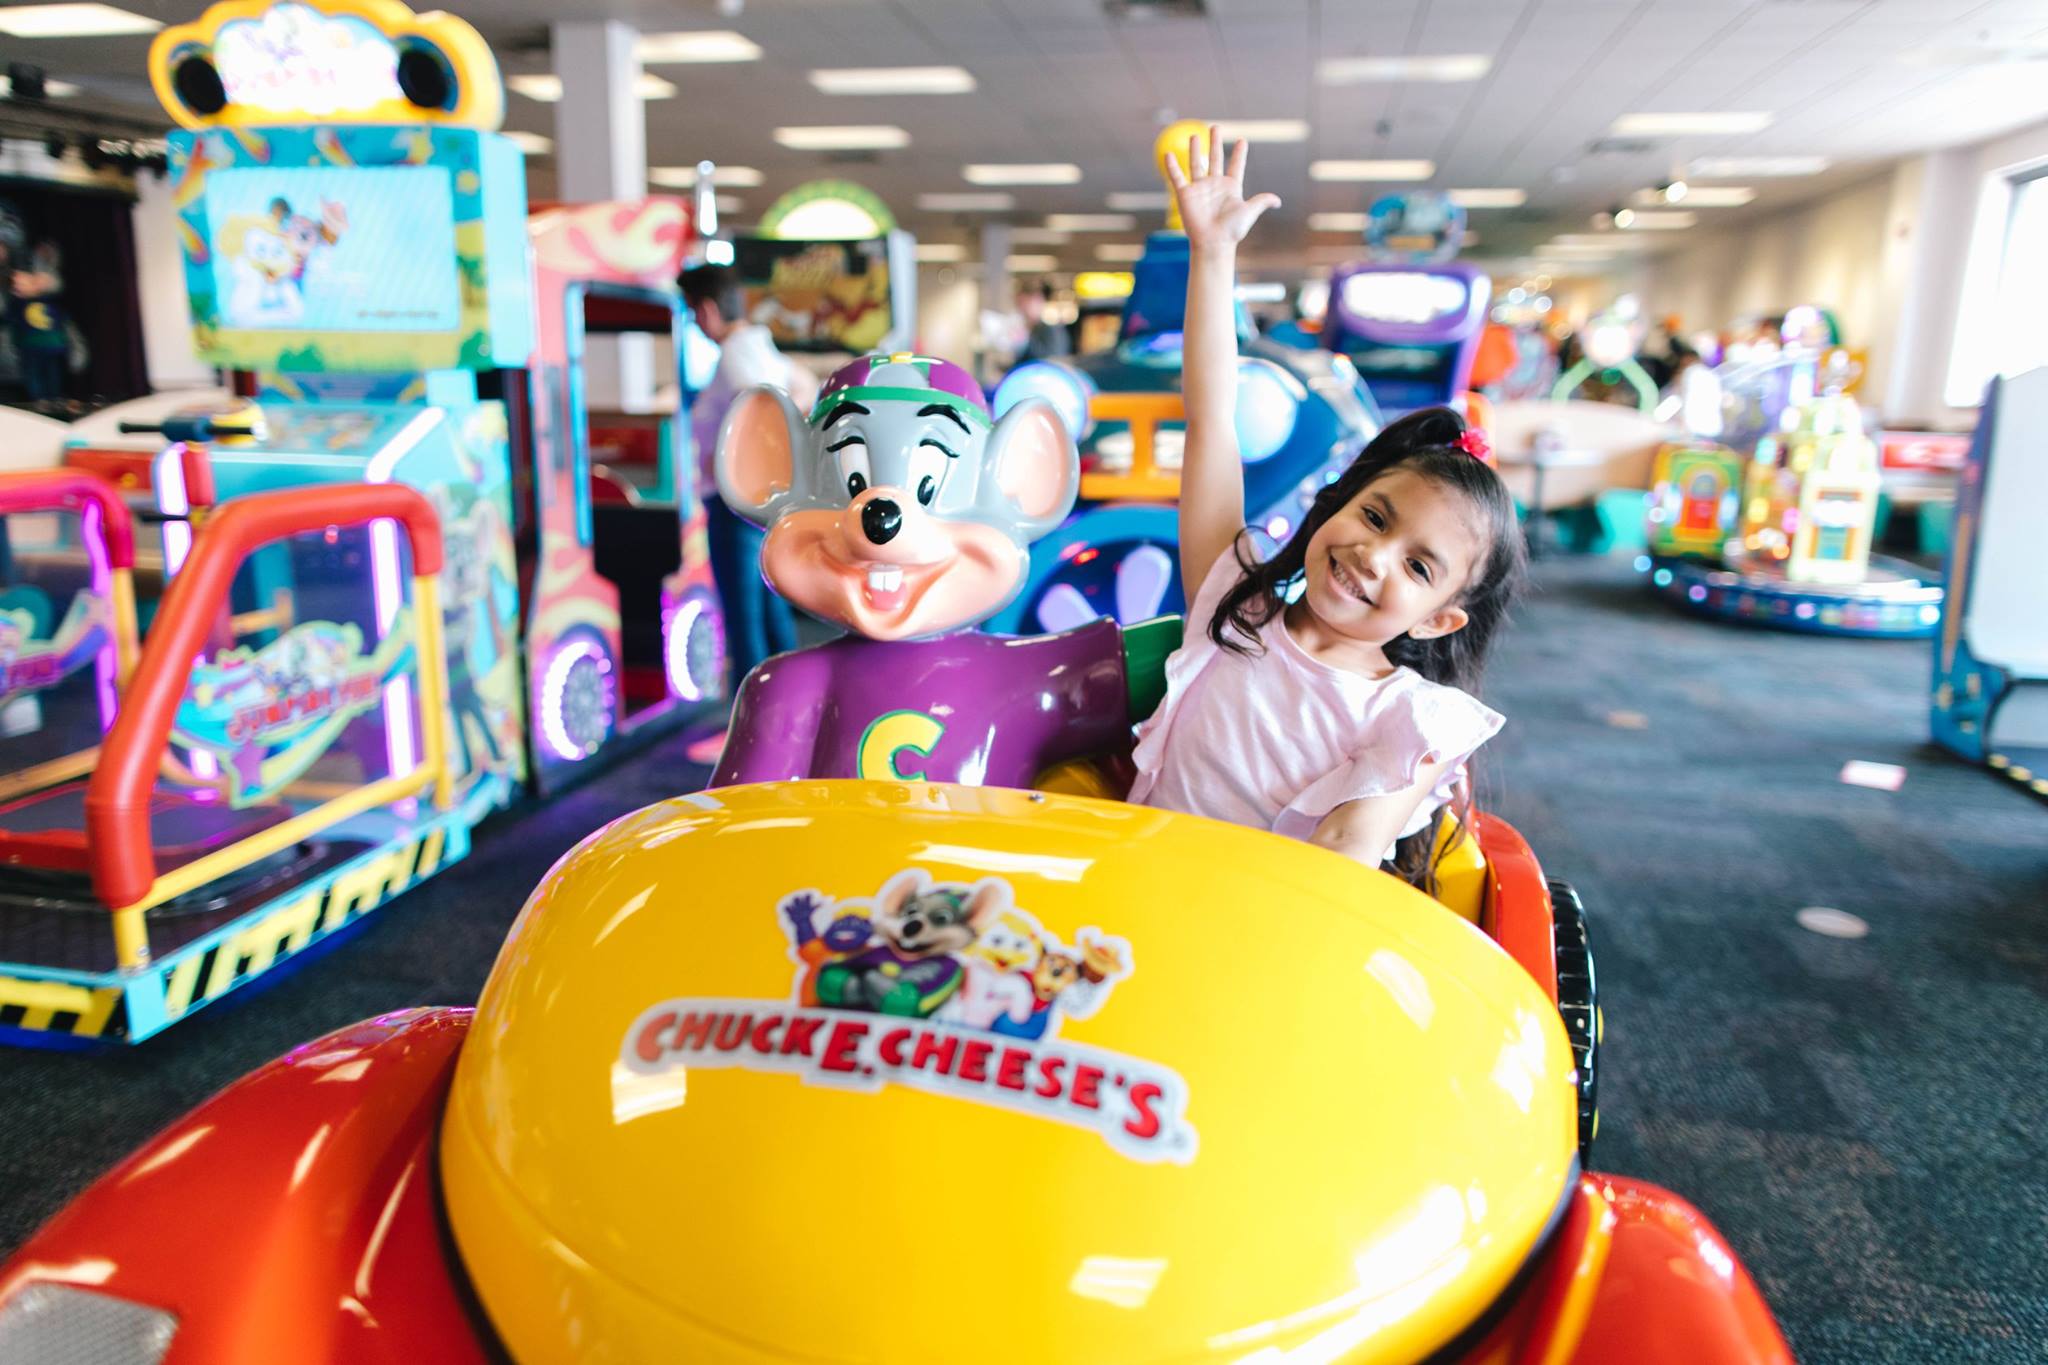 $10 Chuck E. Cheese’s gift card for $5 at Groupon